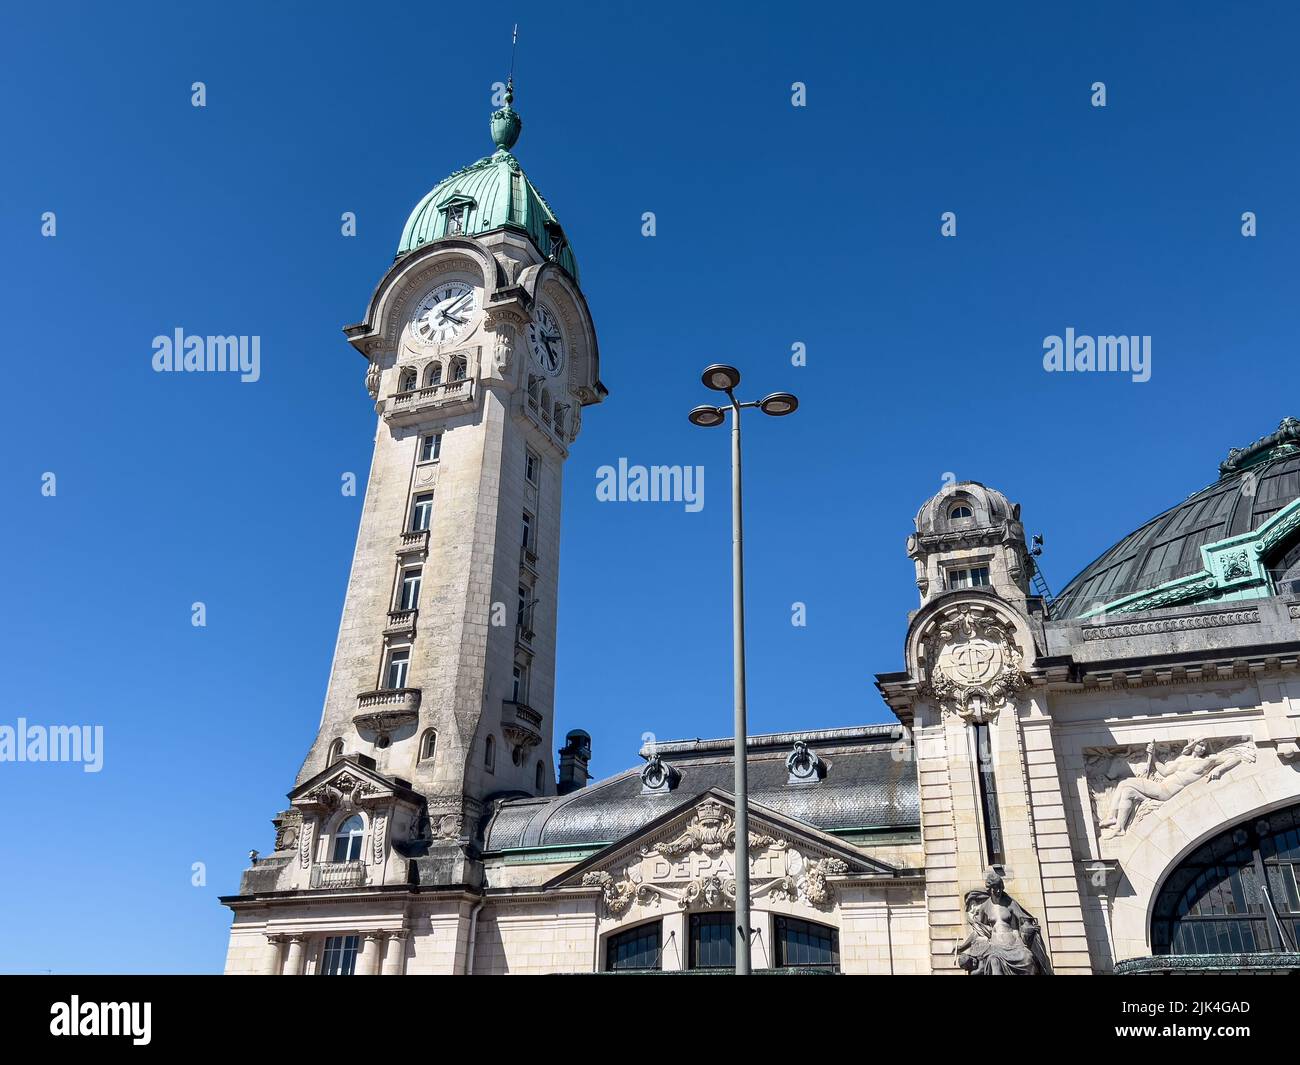 Gare de Limoges-Bénédictins with distinctive dome and tower, blue sky Stock Photo